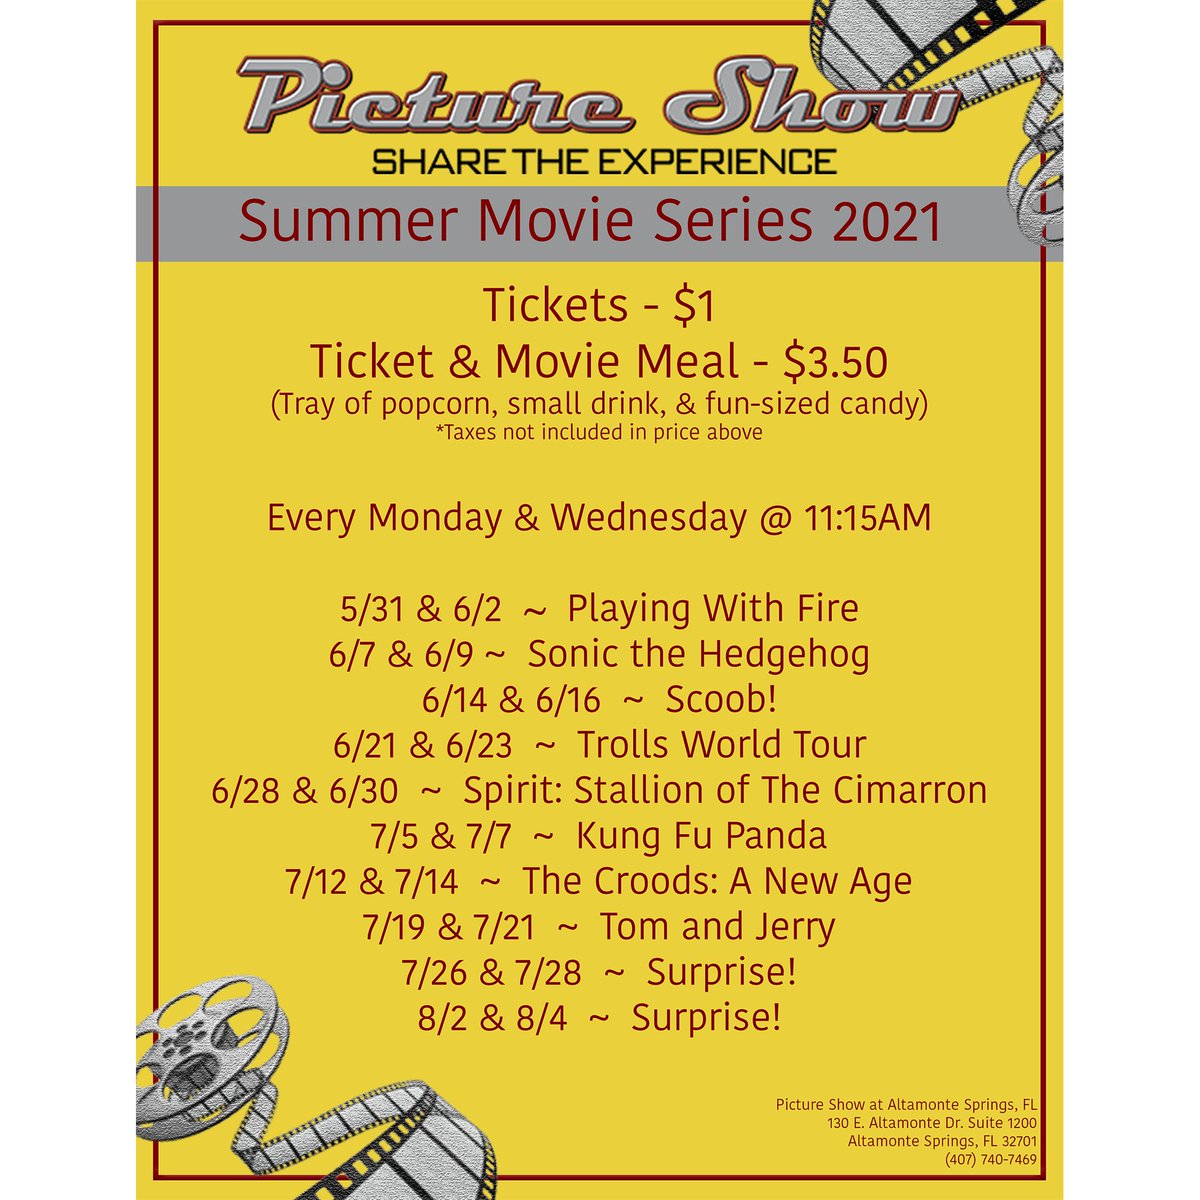 Did you miss today's Summer Movie Series at 11:15AM - Don't worry Sonic The Hedgehog will be playing again on Wednesday at 11:15AM!!!! https://t.co/VRuDI6FrUt